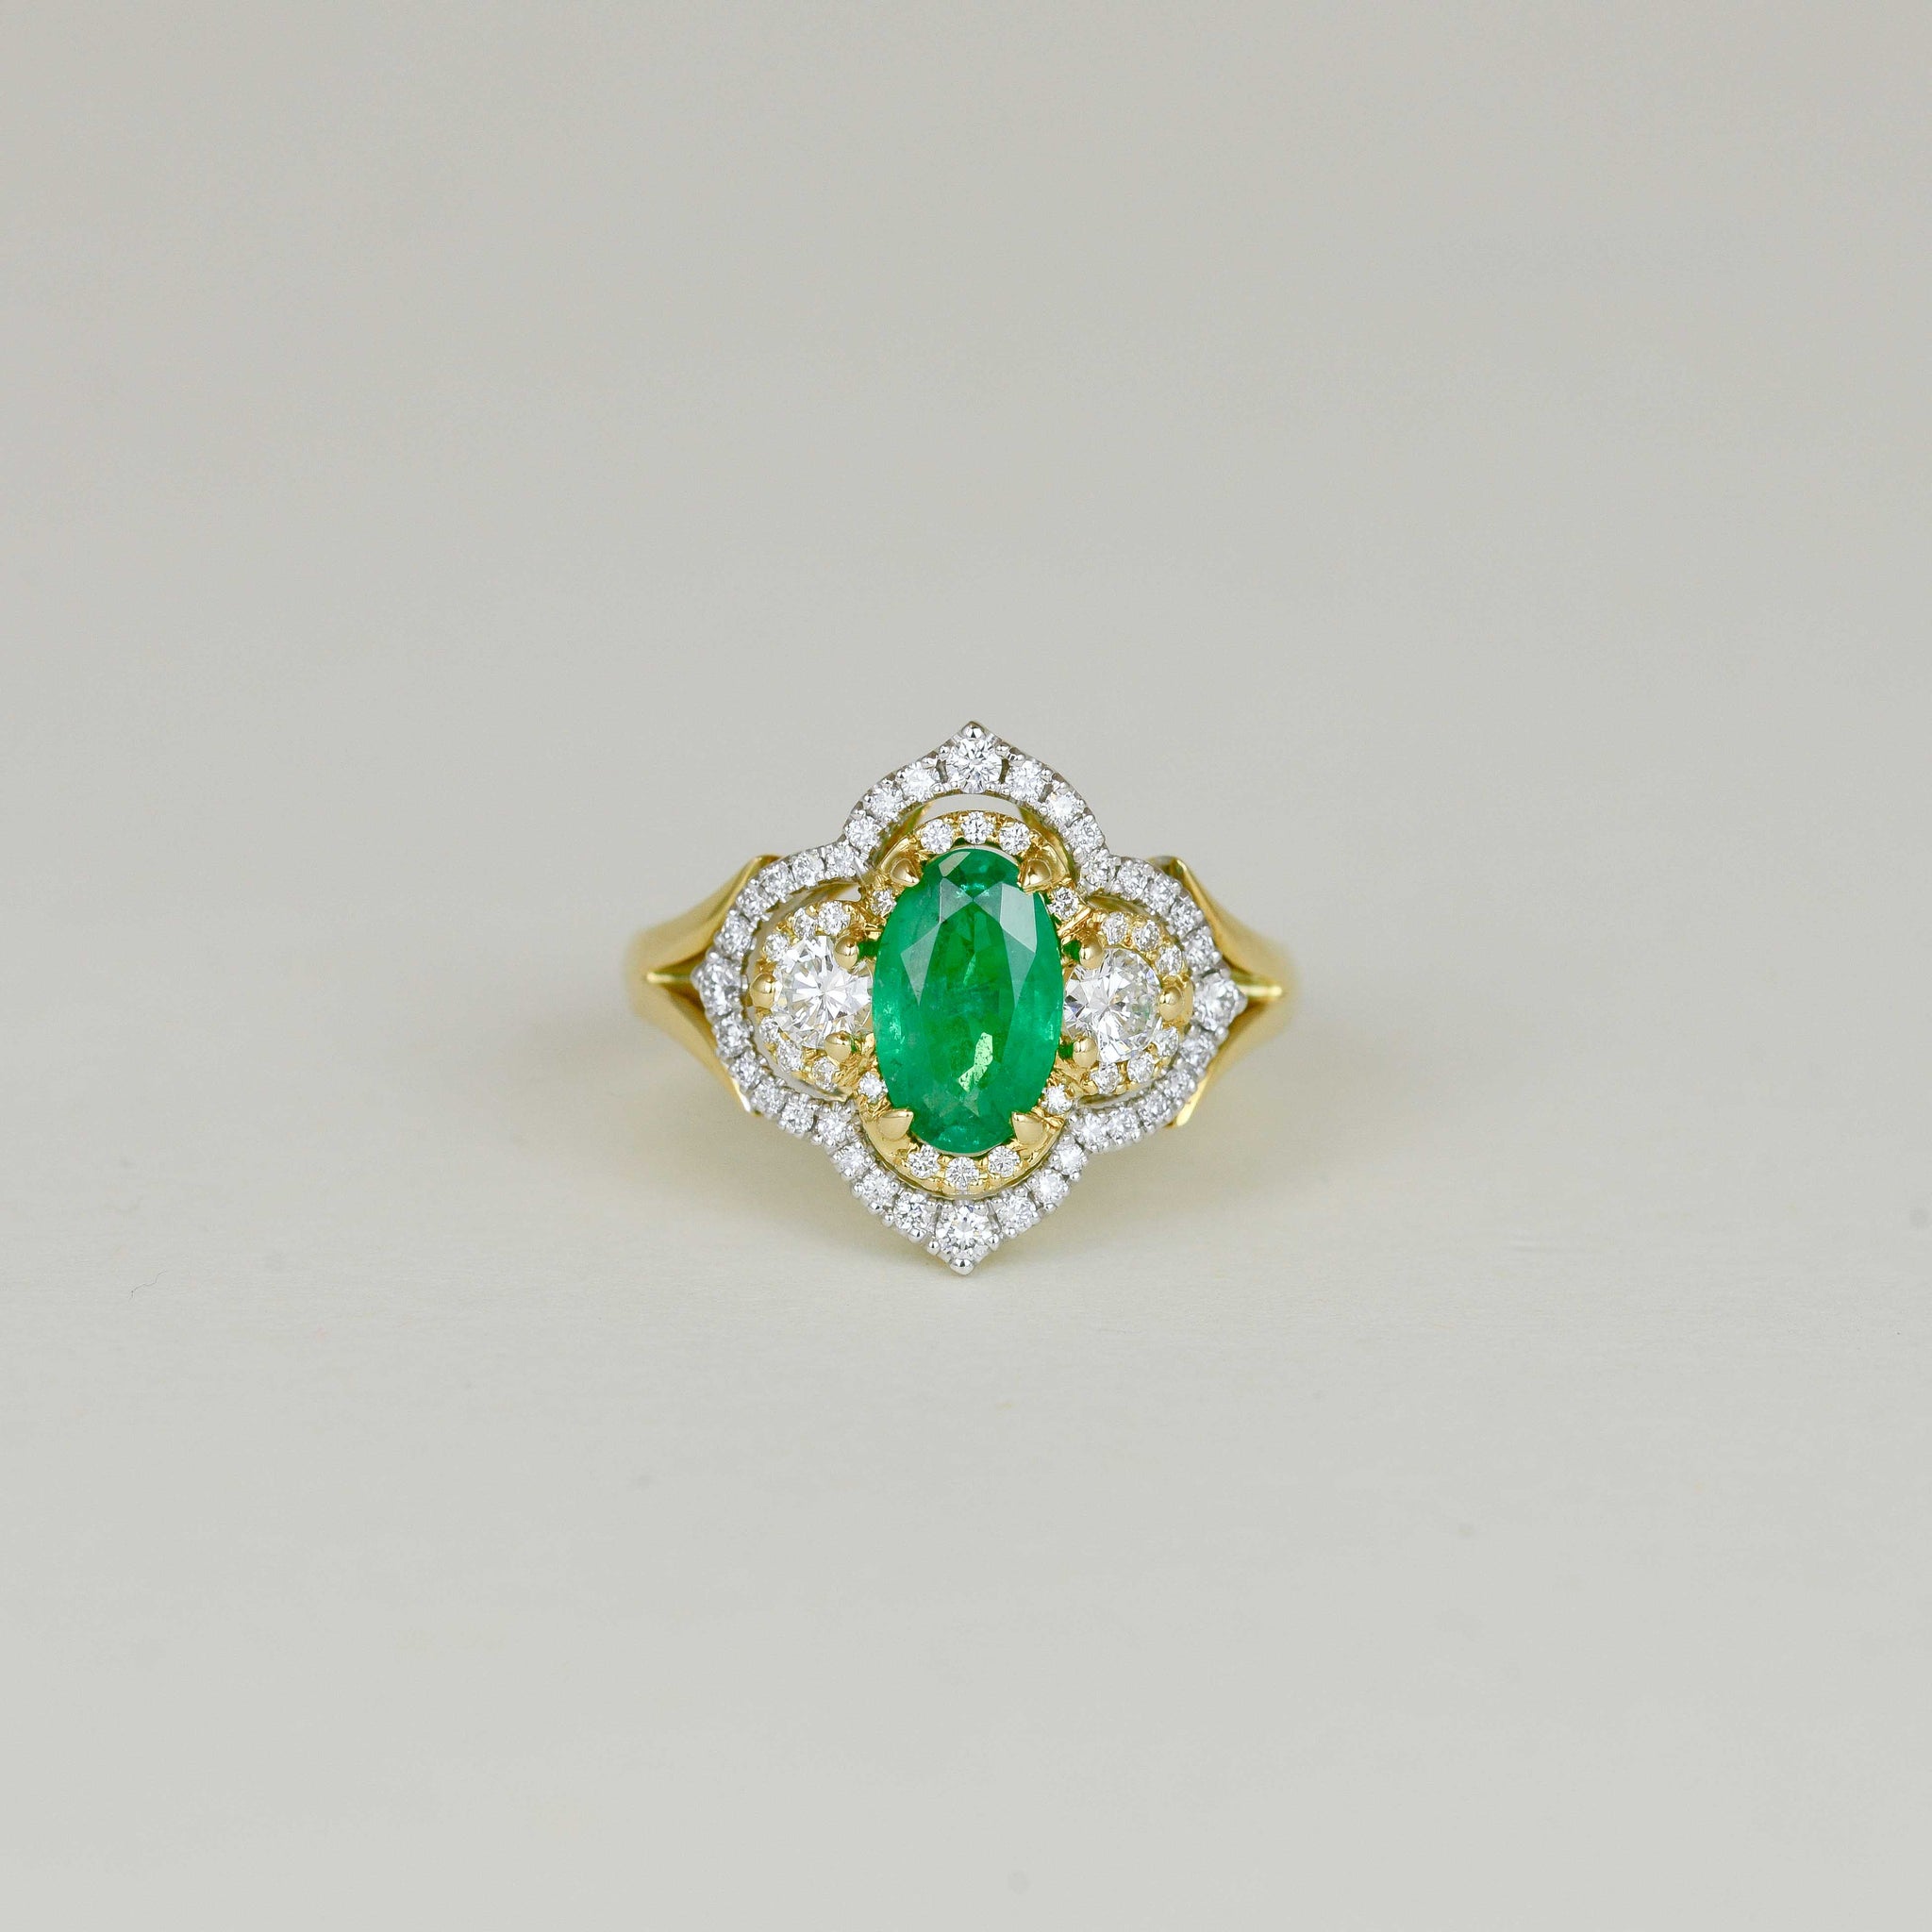 18ct Yellow and White Gold 1.23ct Emerald and Diamond Ring